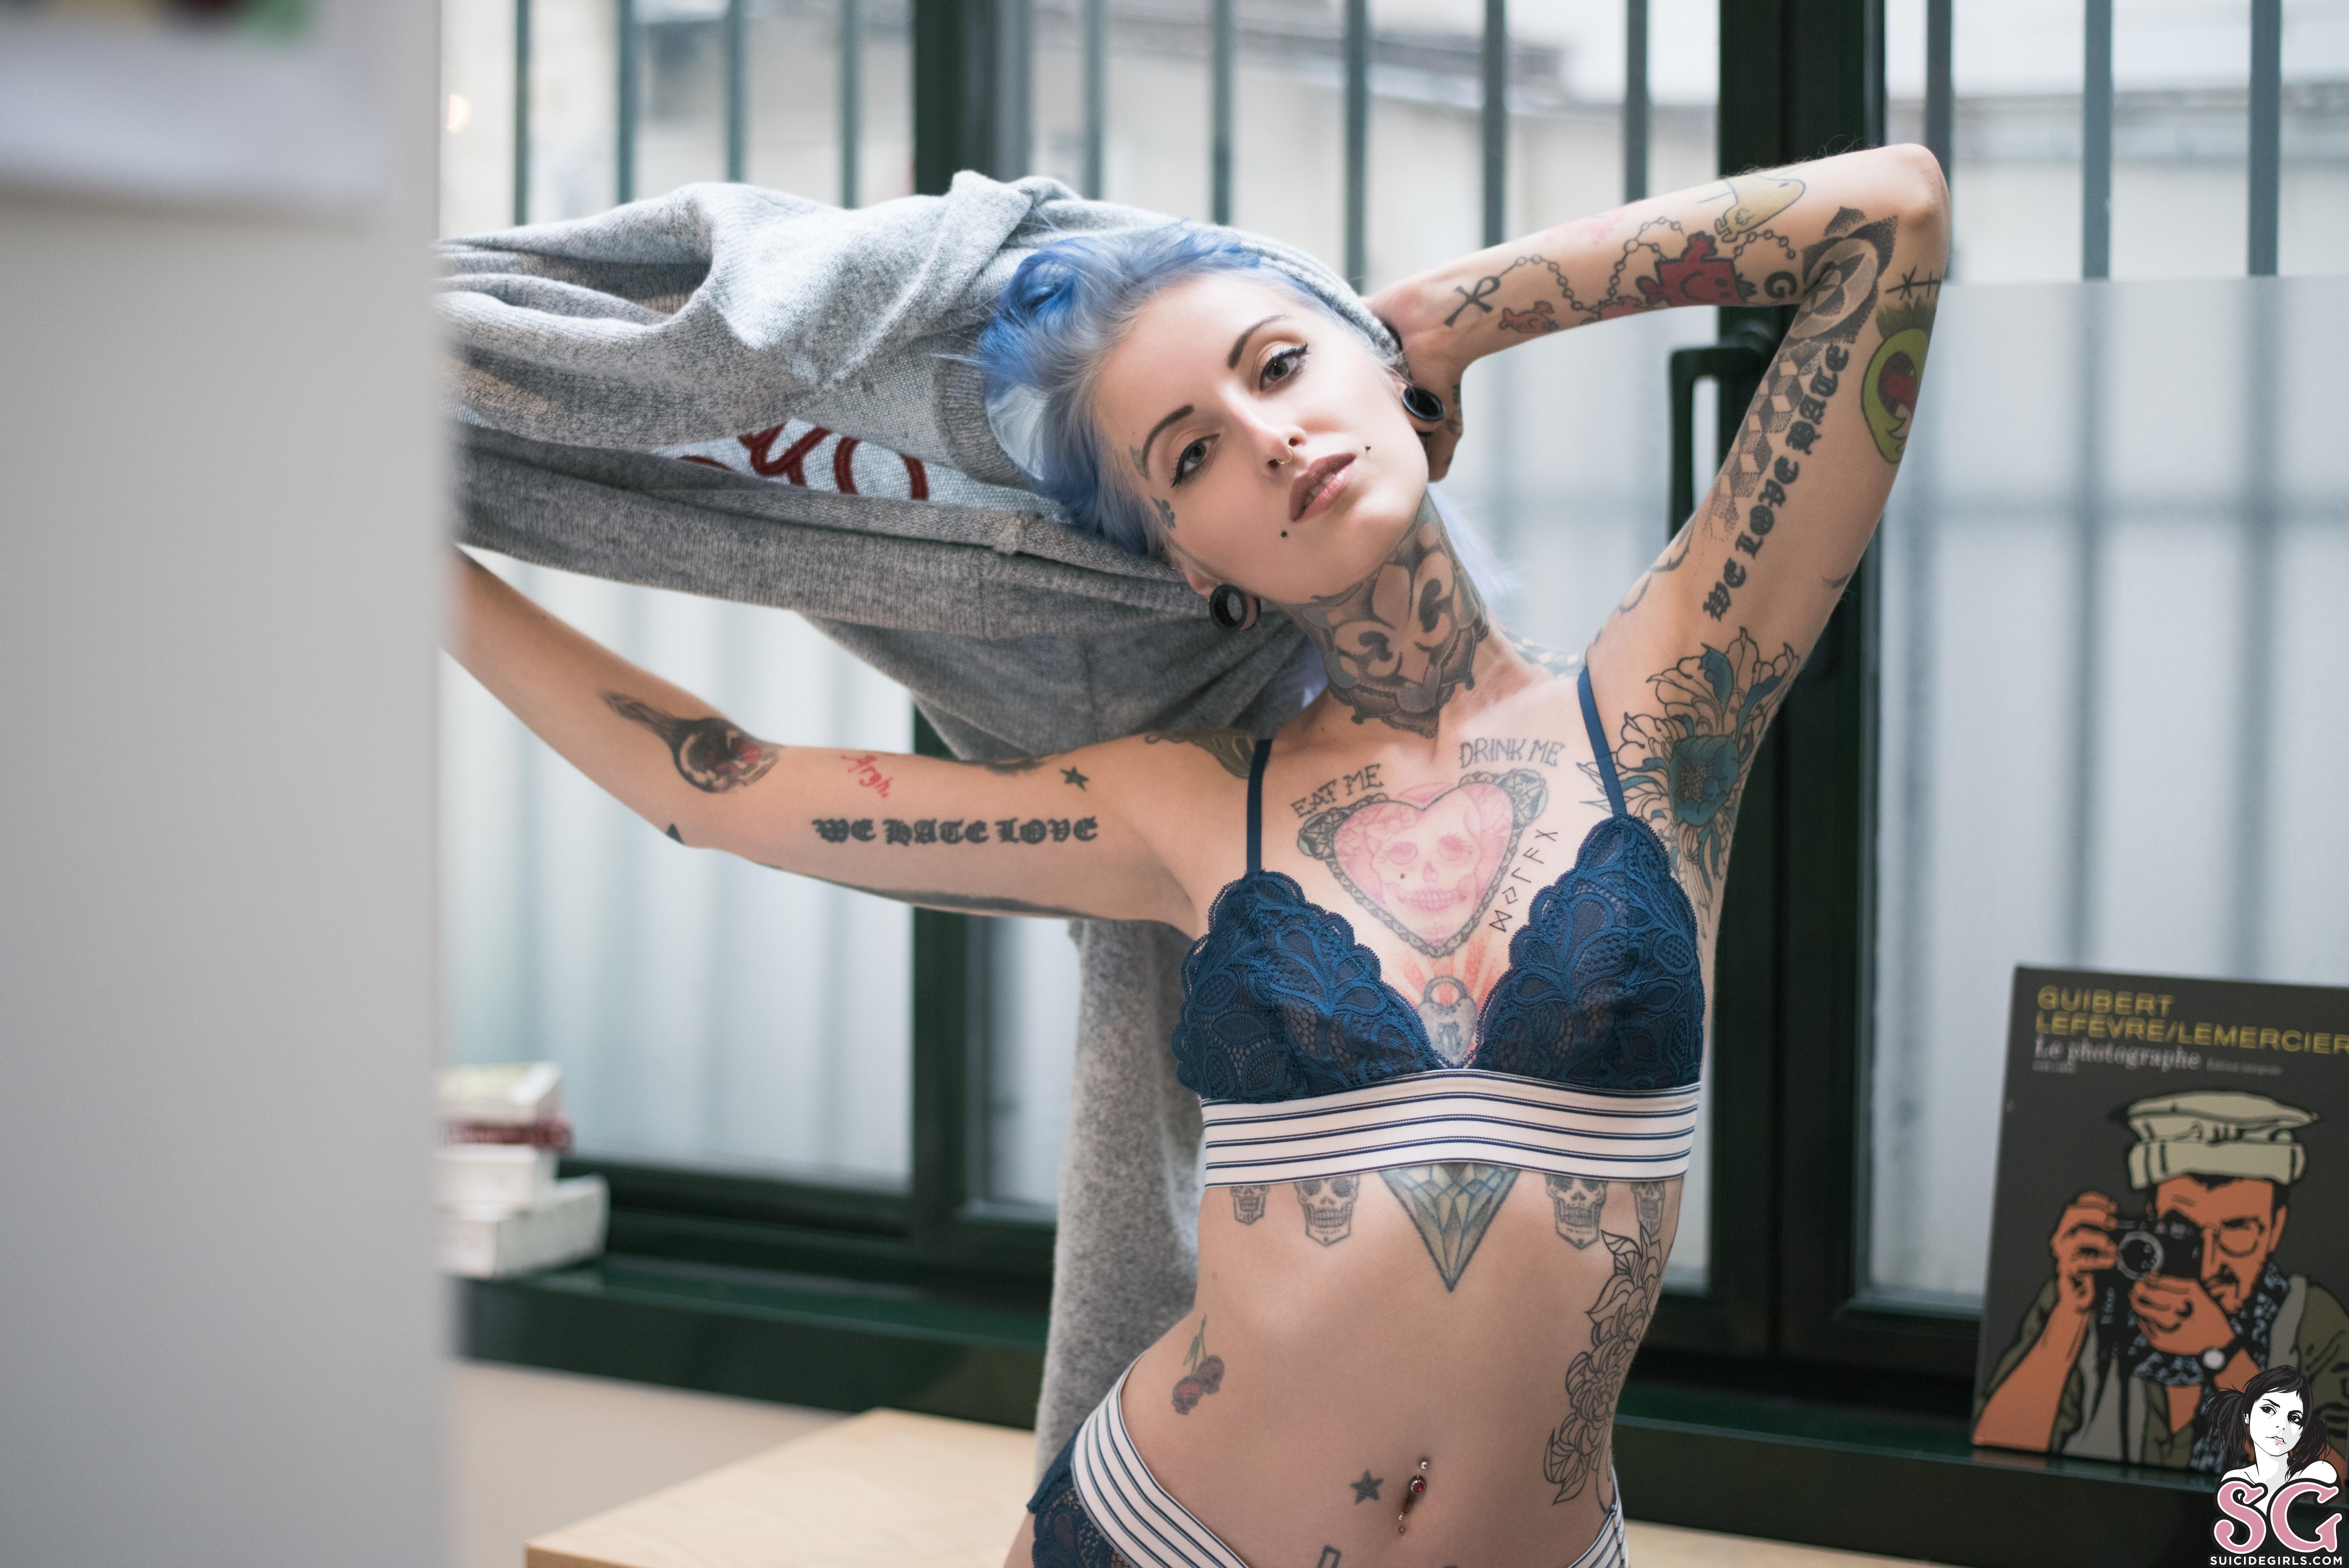 People 6787x4530 Gladyce Suicide Suicide Girls model dyed hair tattoo lingerie blue hair piercing women women indoors watermarked